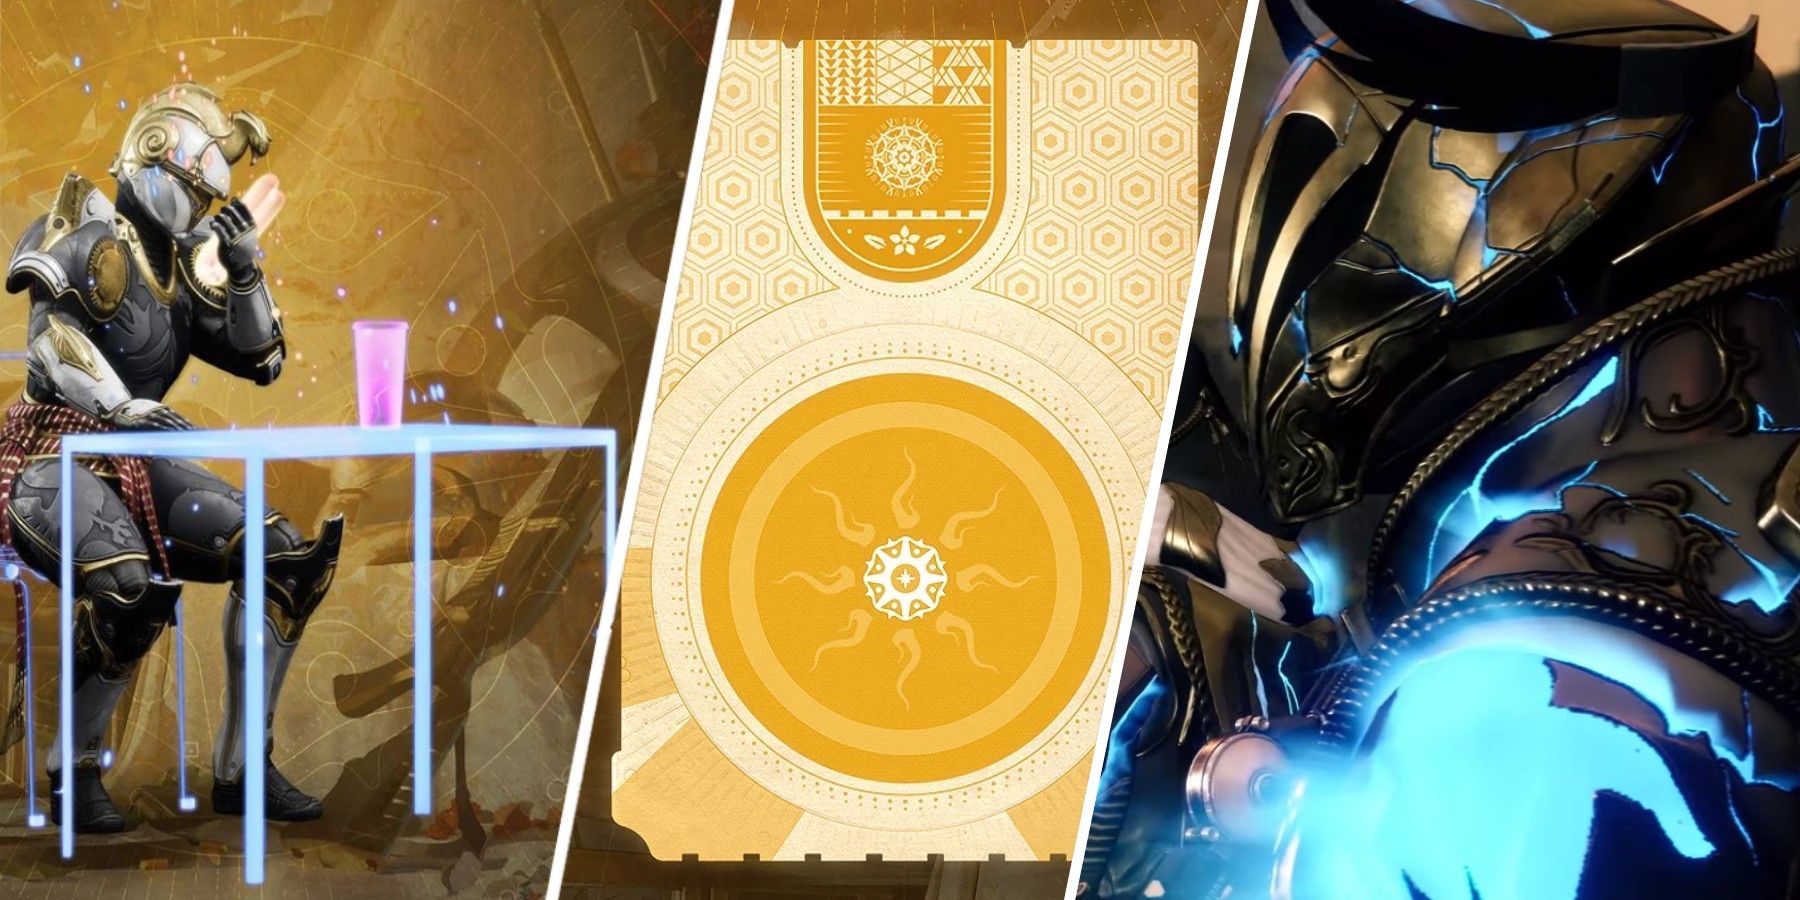 destiny 2 solstice event 2022 solstice event card good idea not much substance old challenges triumphs seal all events year improvements